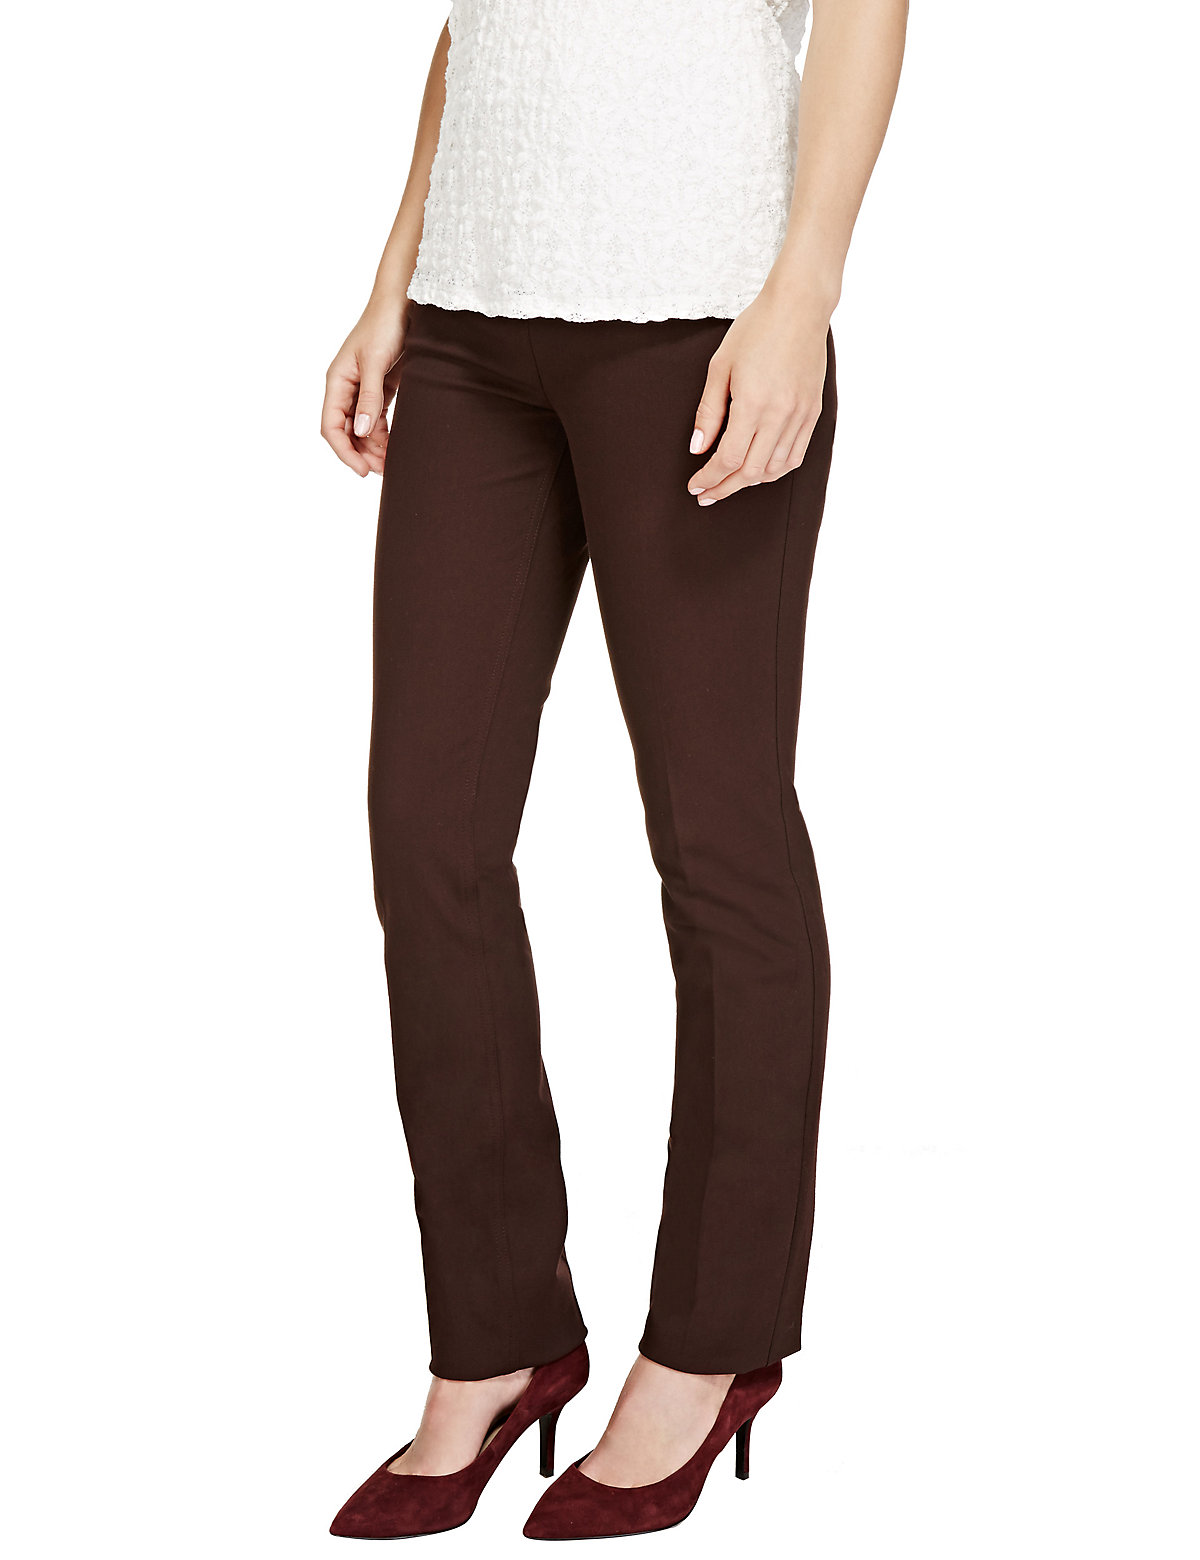 Ladies Slim Leg Tailored Trousers, Side Fastening, Stretch Trousers